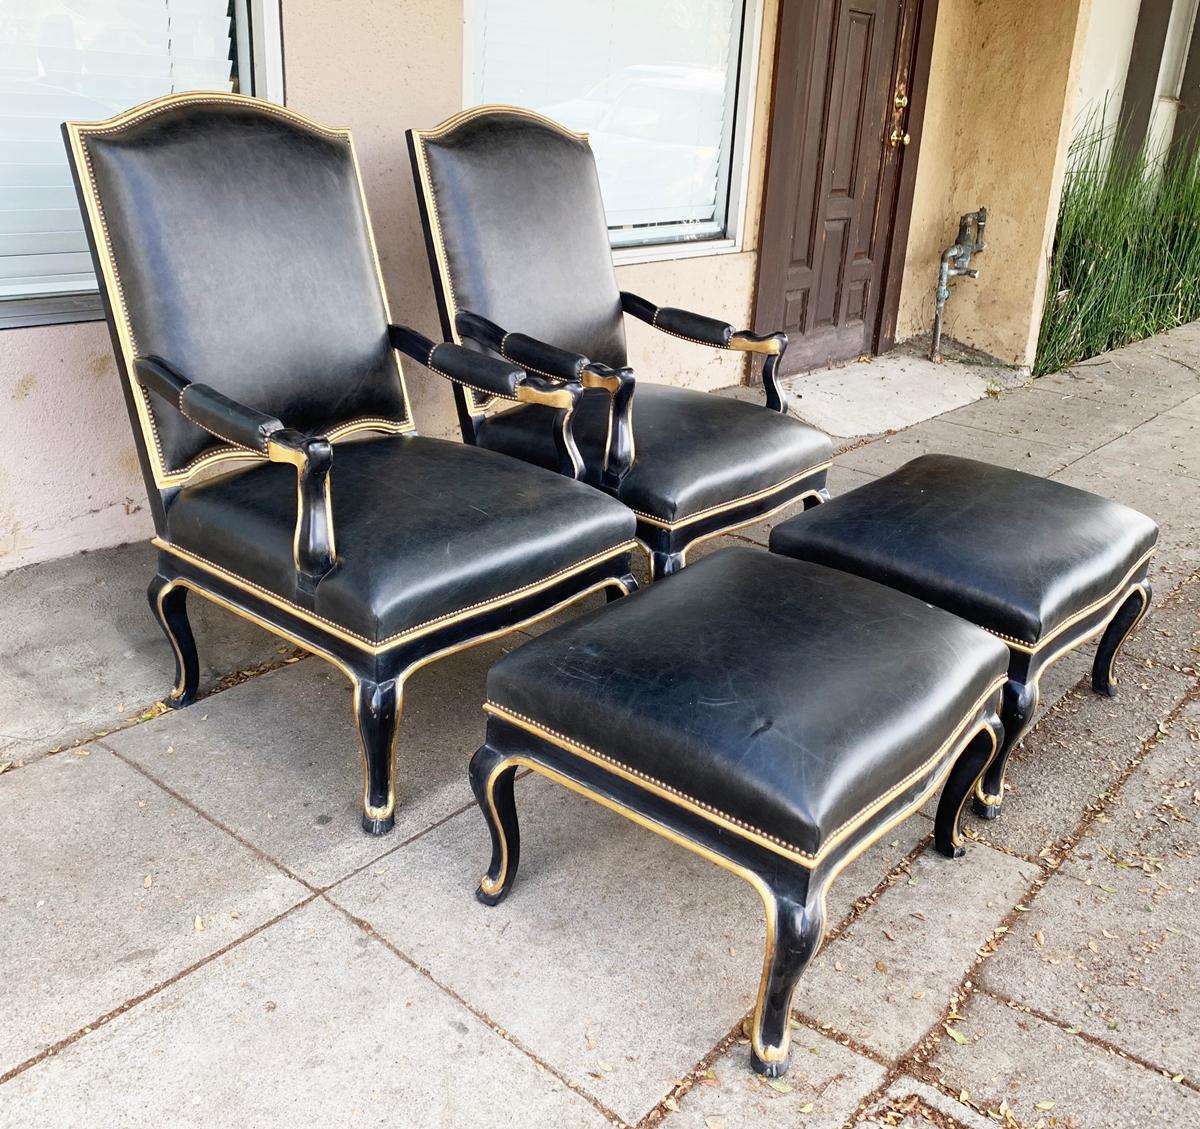 Pair of black leather armchairs and ottomans with ebonized wood frames and 18-karat gold leaf accents, carved hoof feet and copper nailhead trimming.

The chairs are in excellent condition, minor nicks to feet/frame but overall in excellent shape,